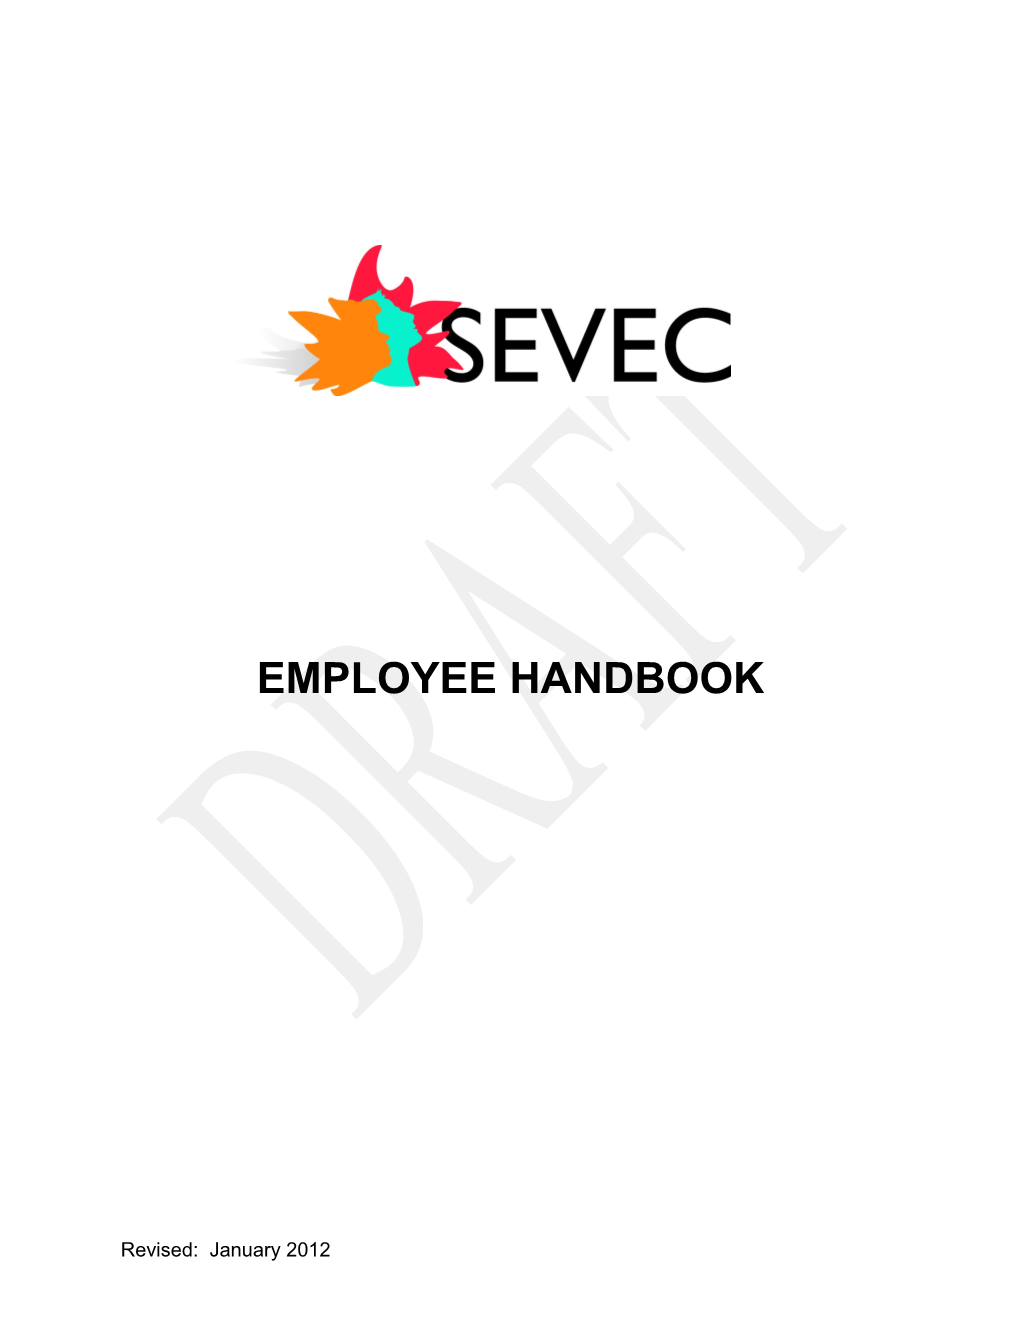 HR Policy Manual and Employee Handbook